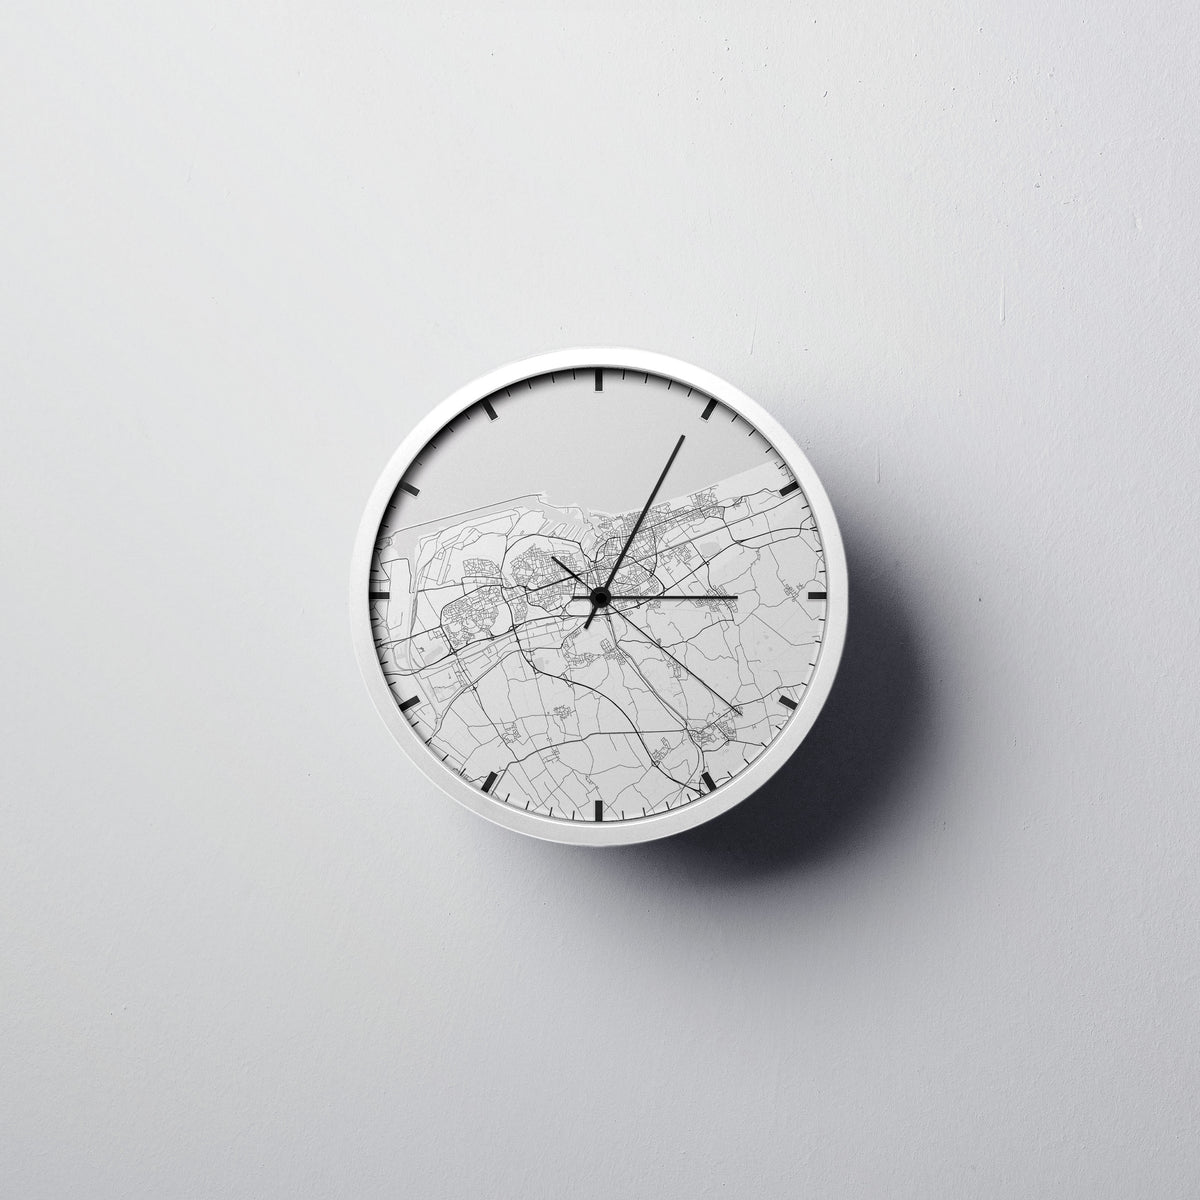 Dunkerque Wall Clock - Point Two Design